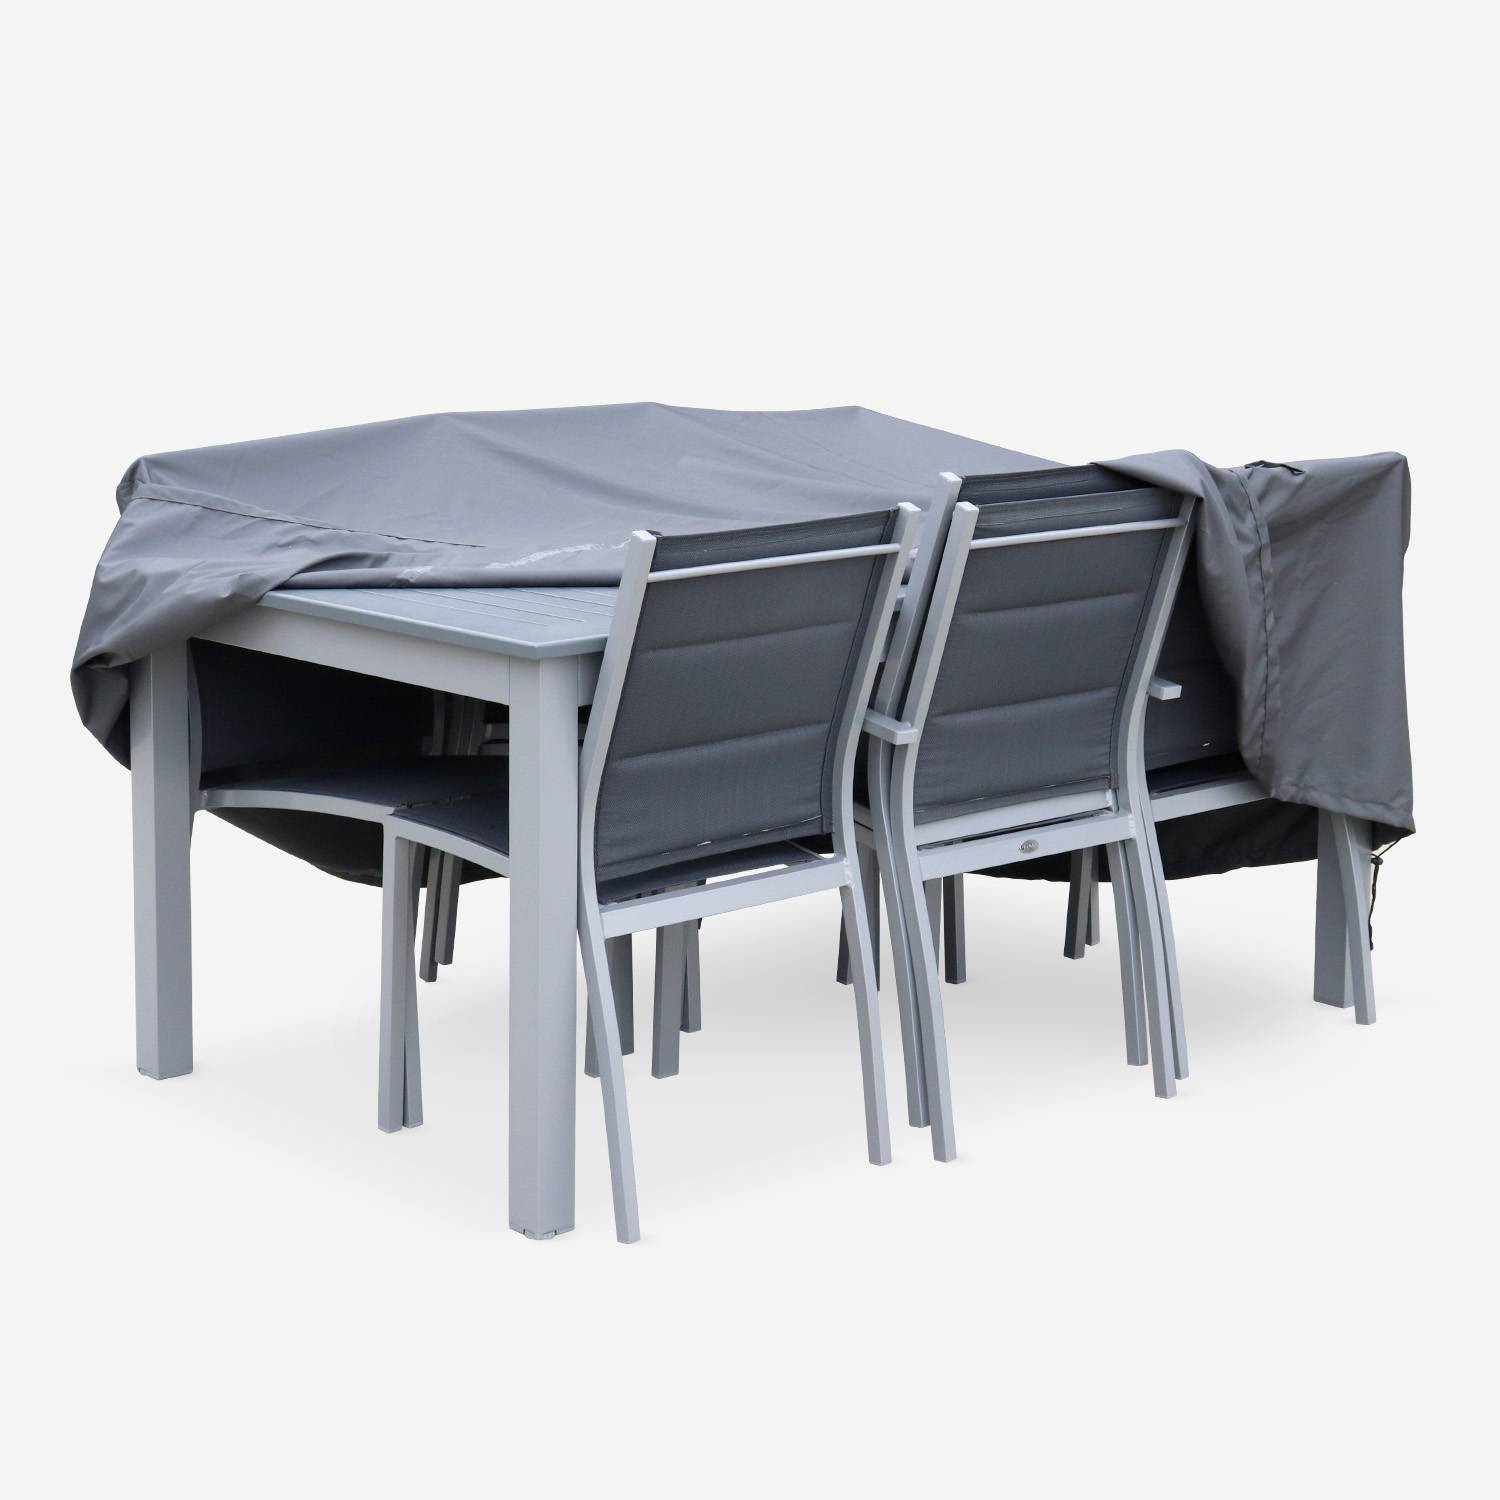 175x124cm dark grey dust cover - Rectangular, PA-coated polyester dust cover for the Chicago and Bergamo garden tables Photo3